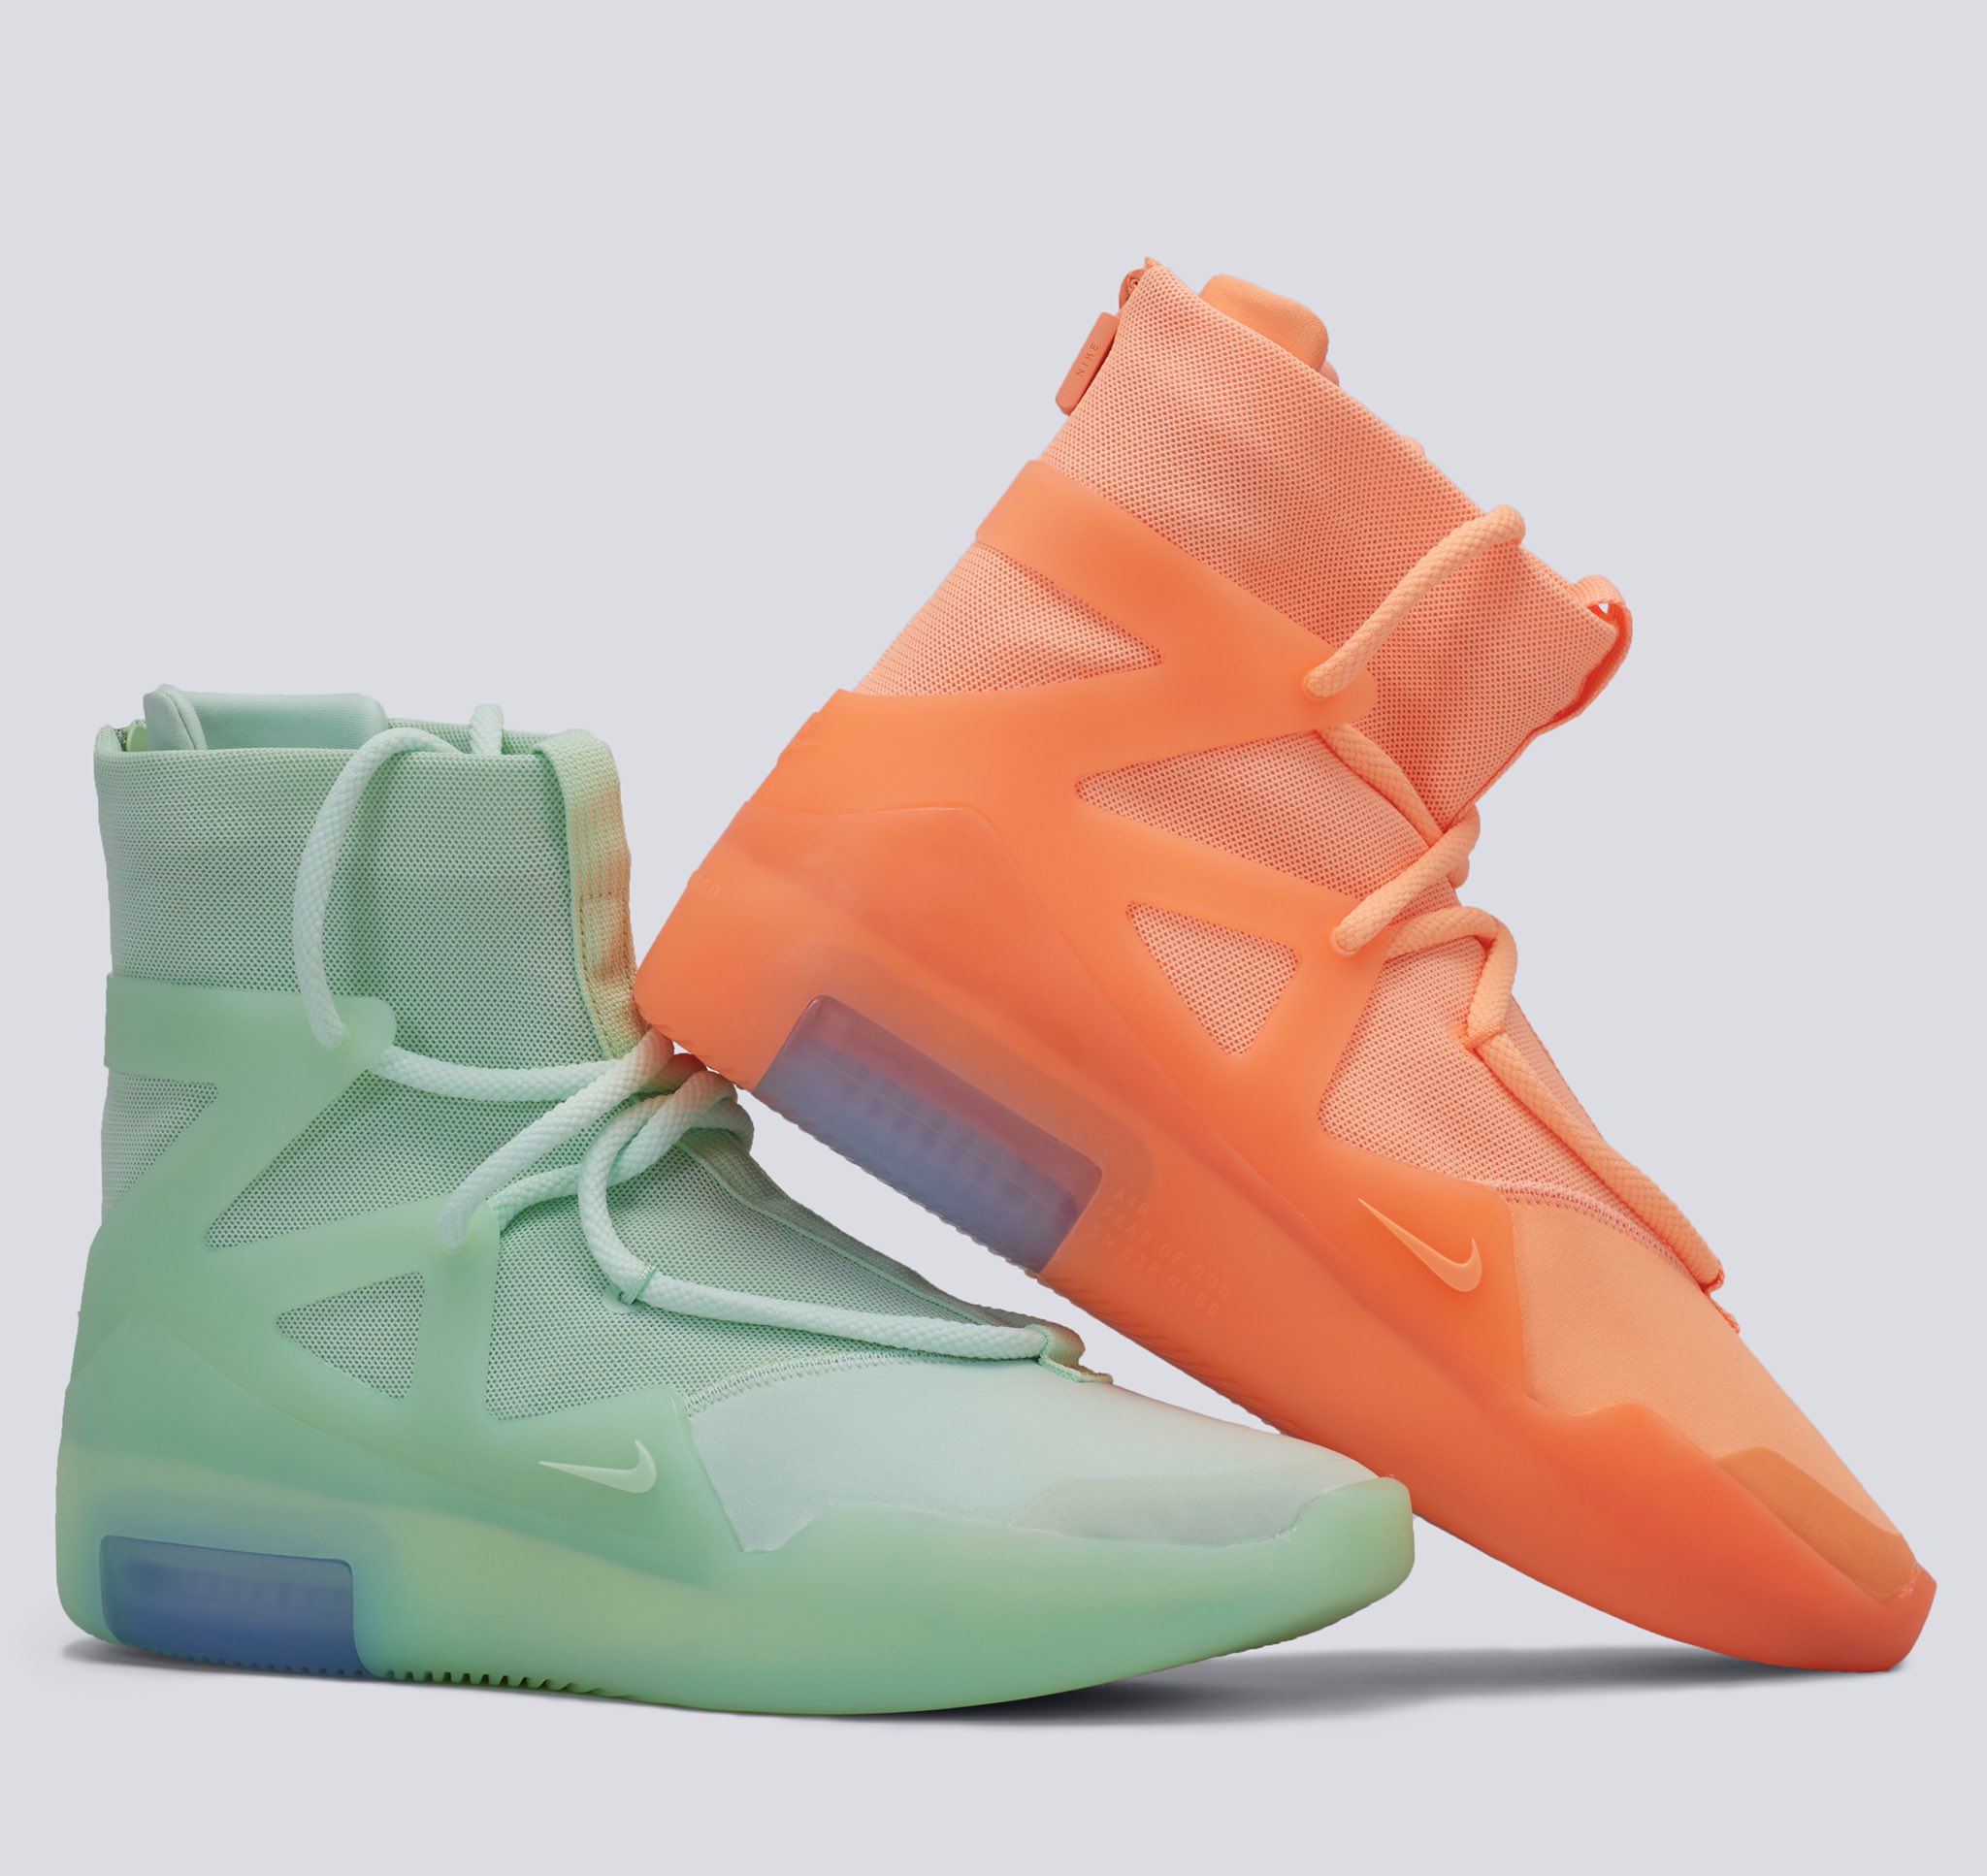 StockX on Twitter: "Bright colors in bold designs just time for summer from Nike and Jerry Fear of God - you cop the Frosted Spruce or Orange Pulse? Shop